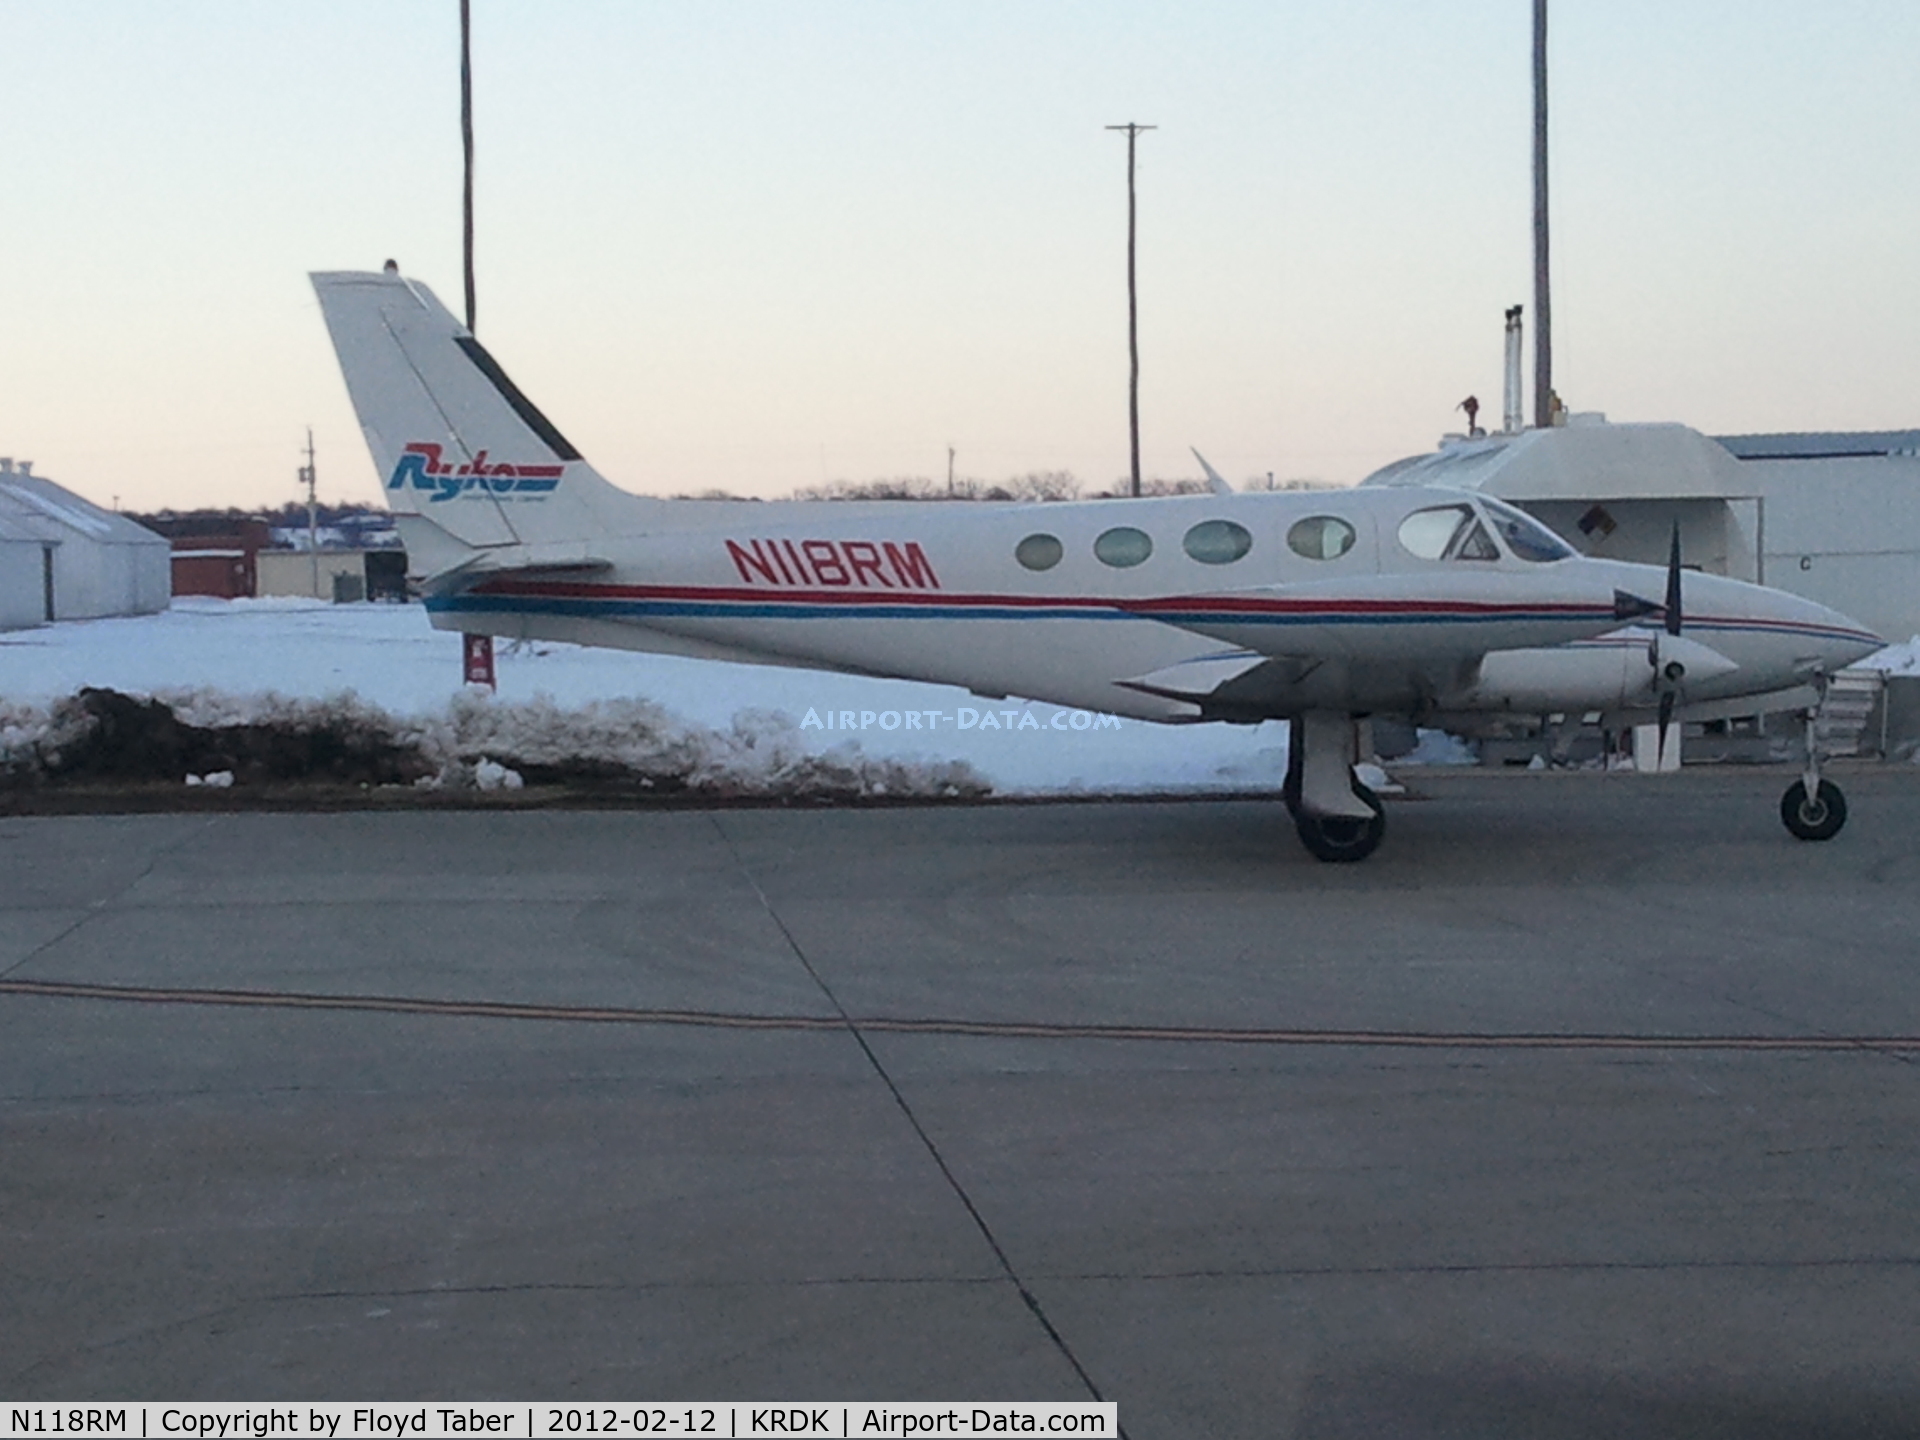 N118RM, Cessna 340A C/N 340A0290, Just finished fueling